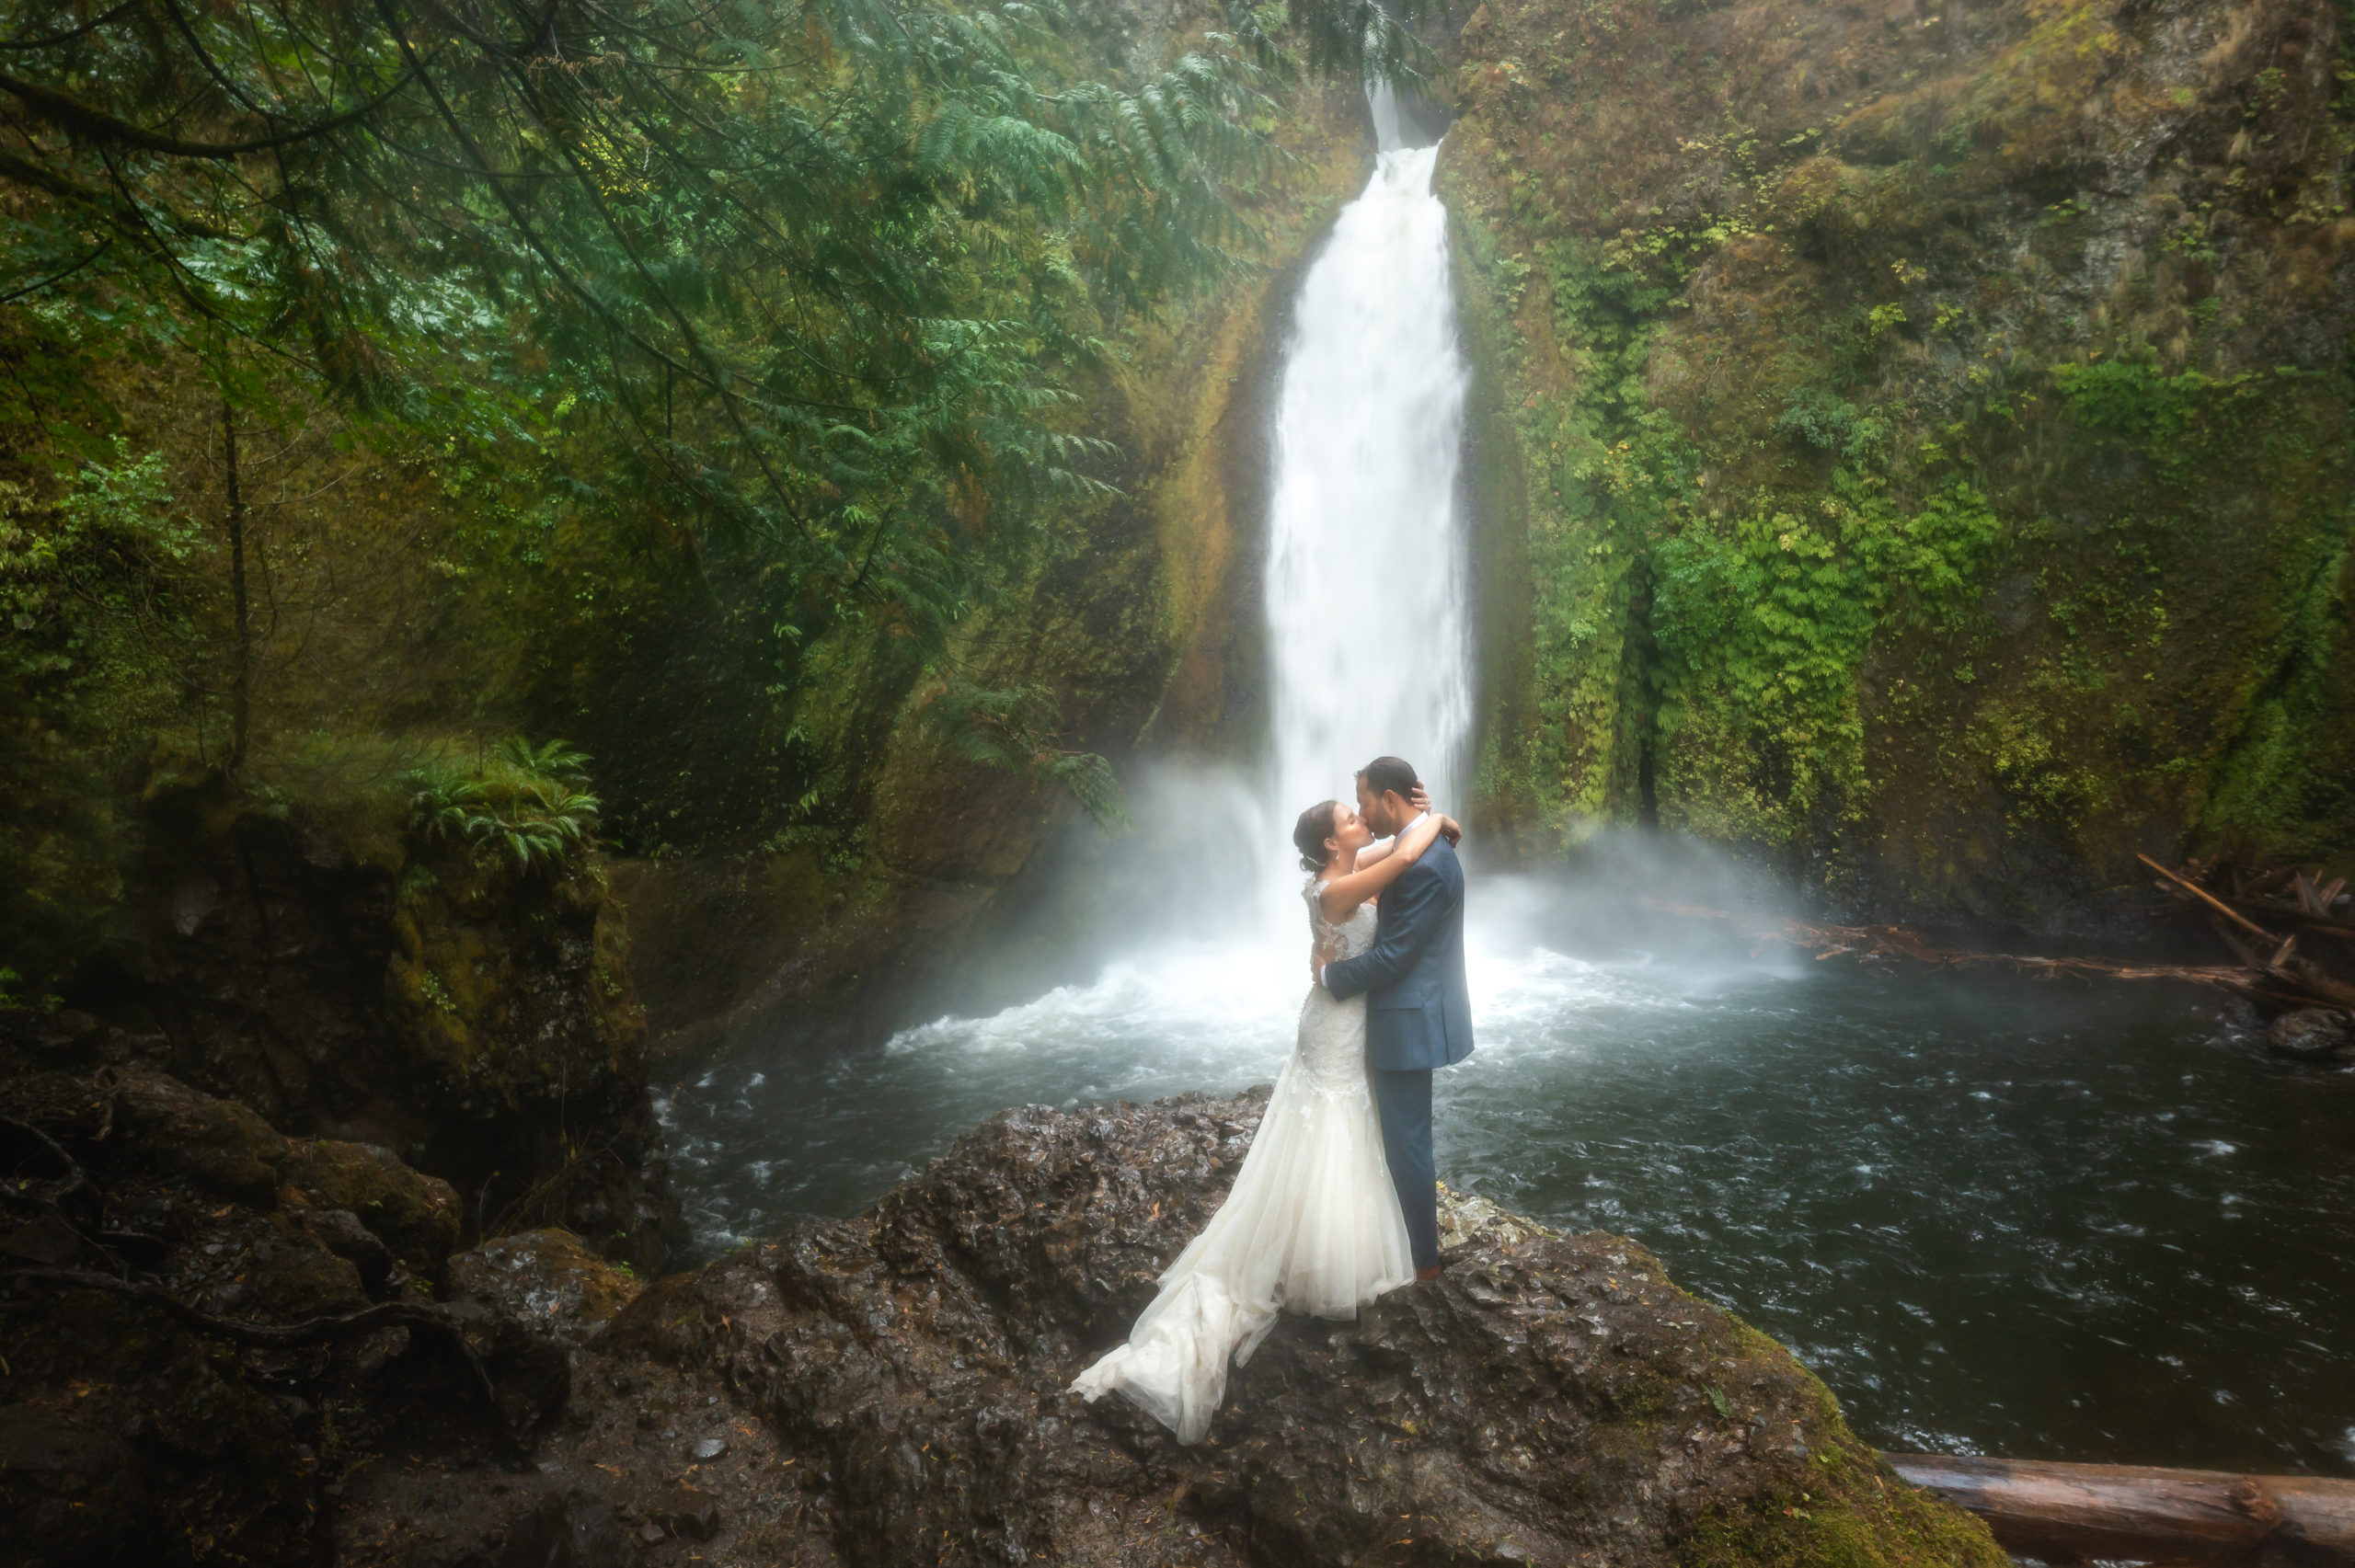 Photography of a couple having their wedding at Wahclella Falls in the Columbia River Gorge, Oregon